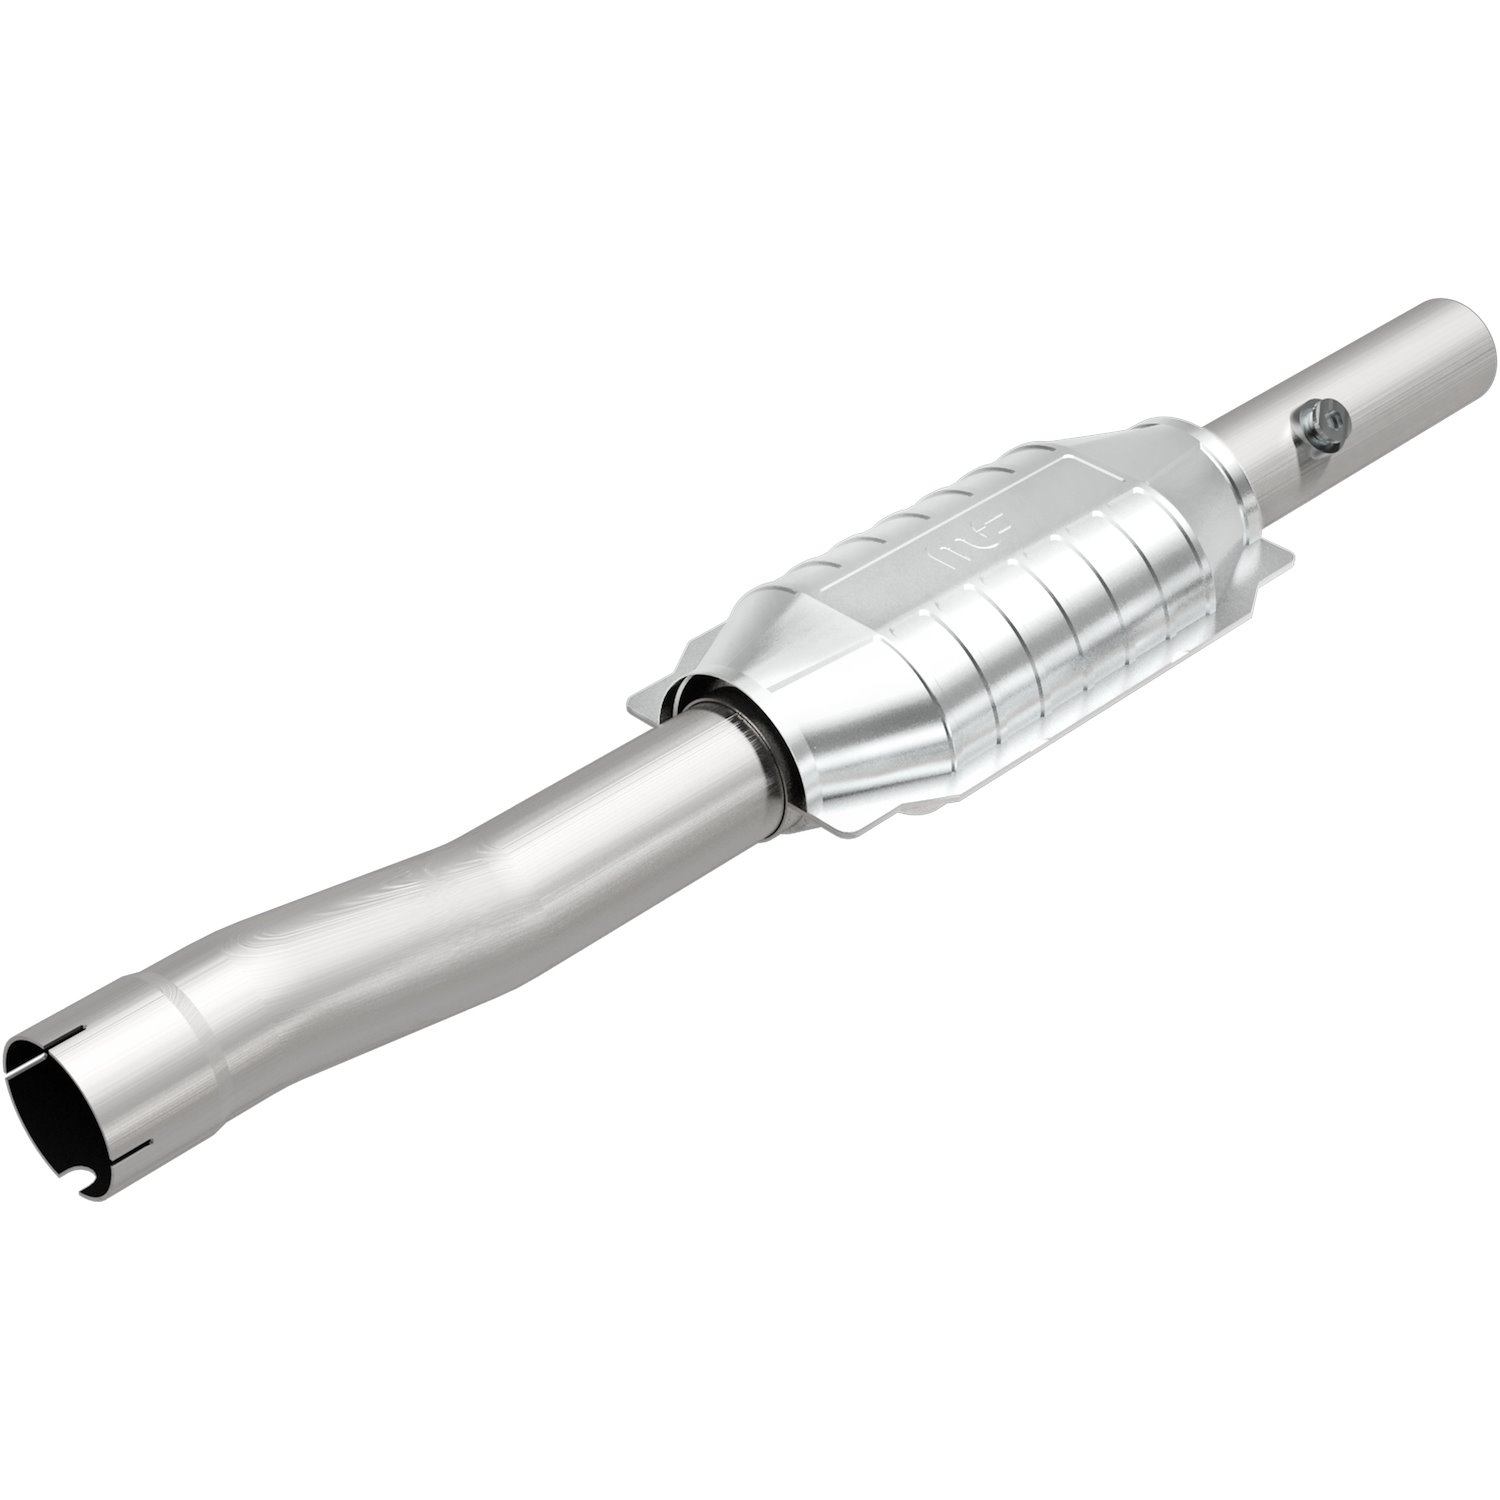 1999-2001 Jeep Grand Cherokee OEM Grade Federal / EPA Compliant Direct-Fit Catalytic Converter